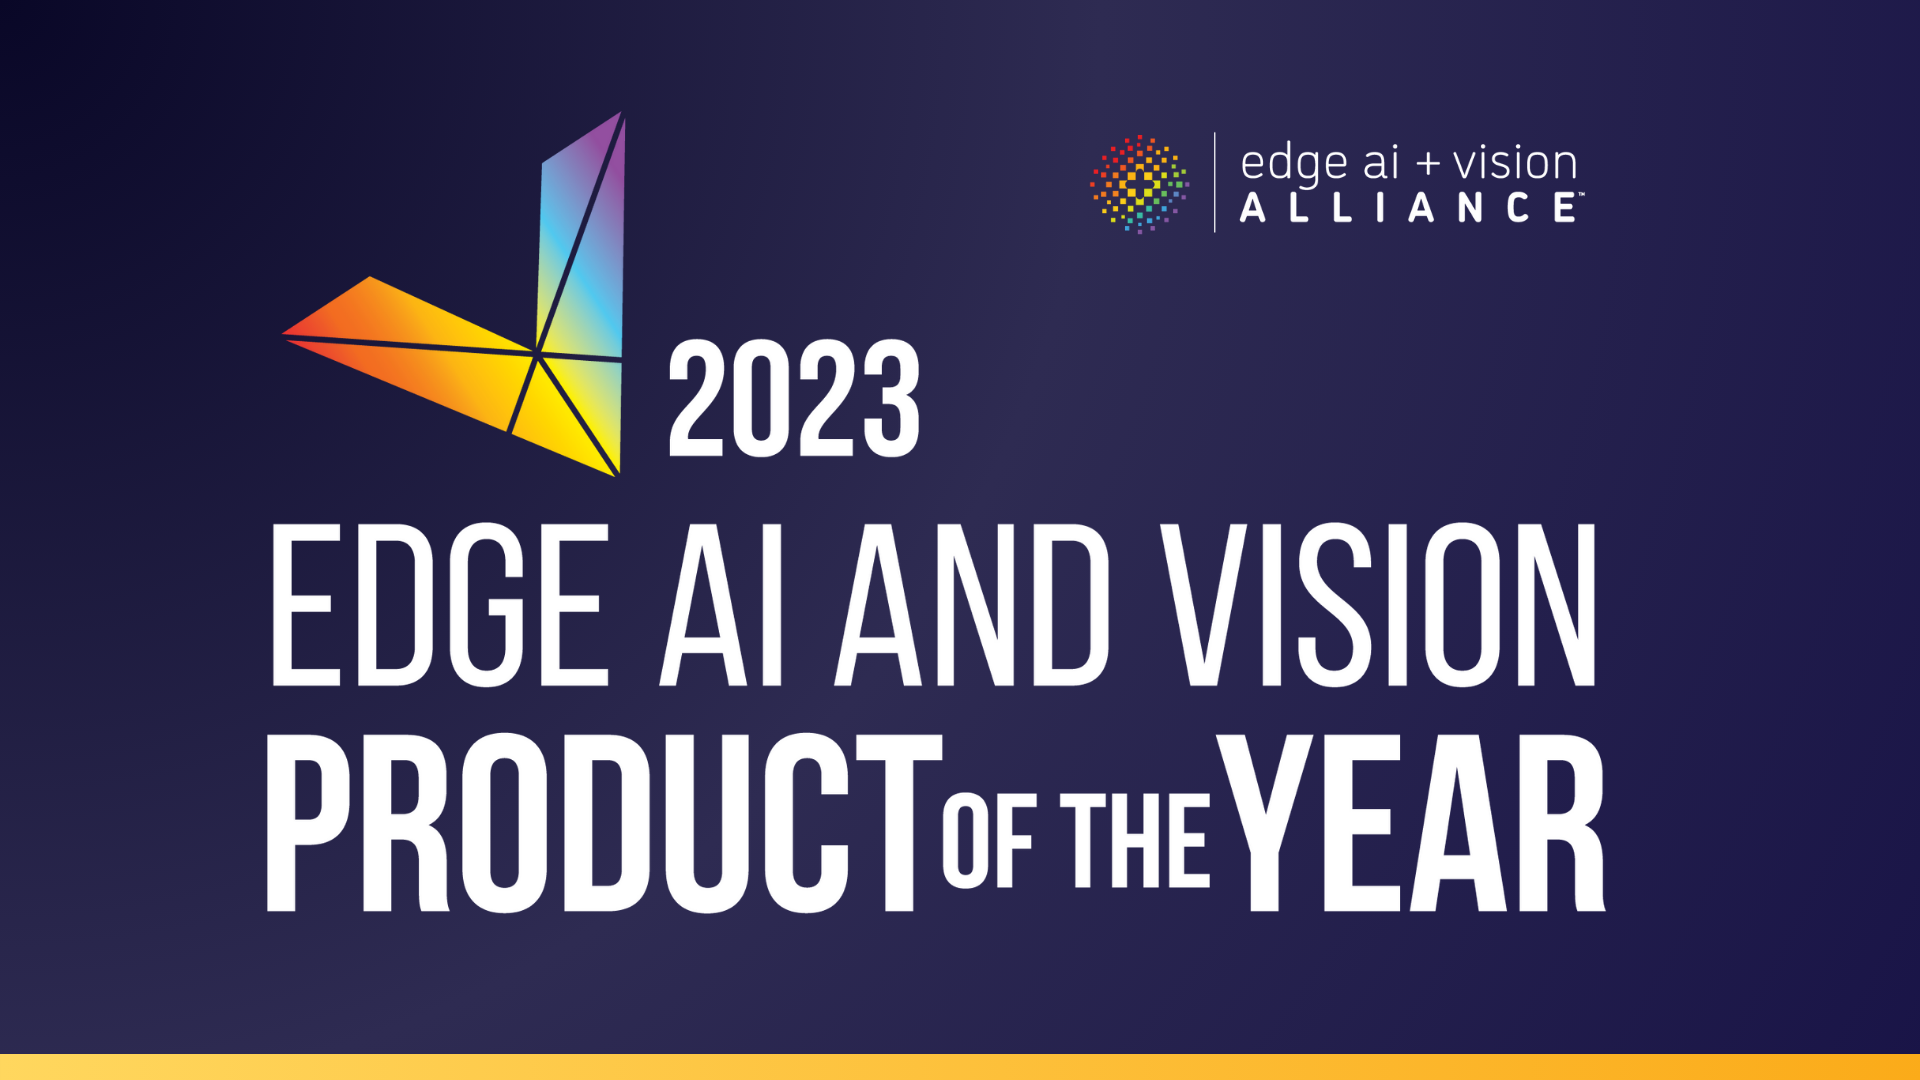 Outsight Wins 2023 Edge AI and Vision Product of the Year Award